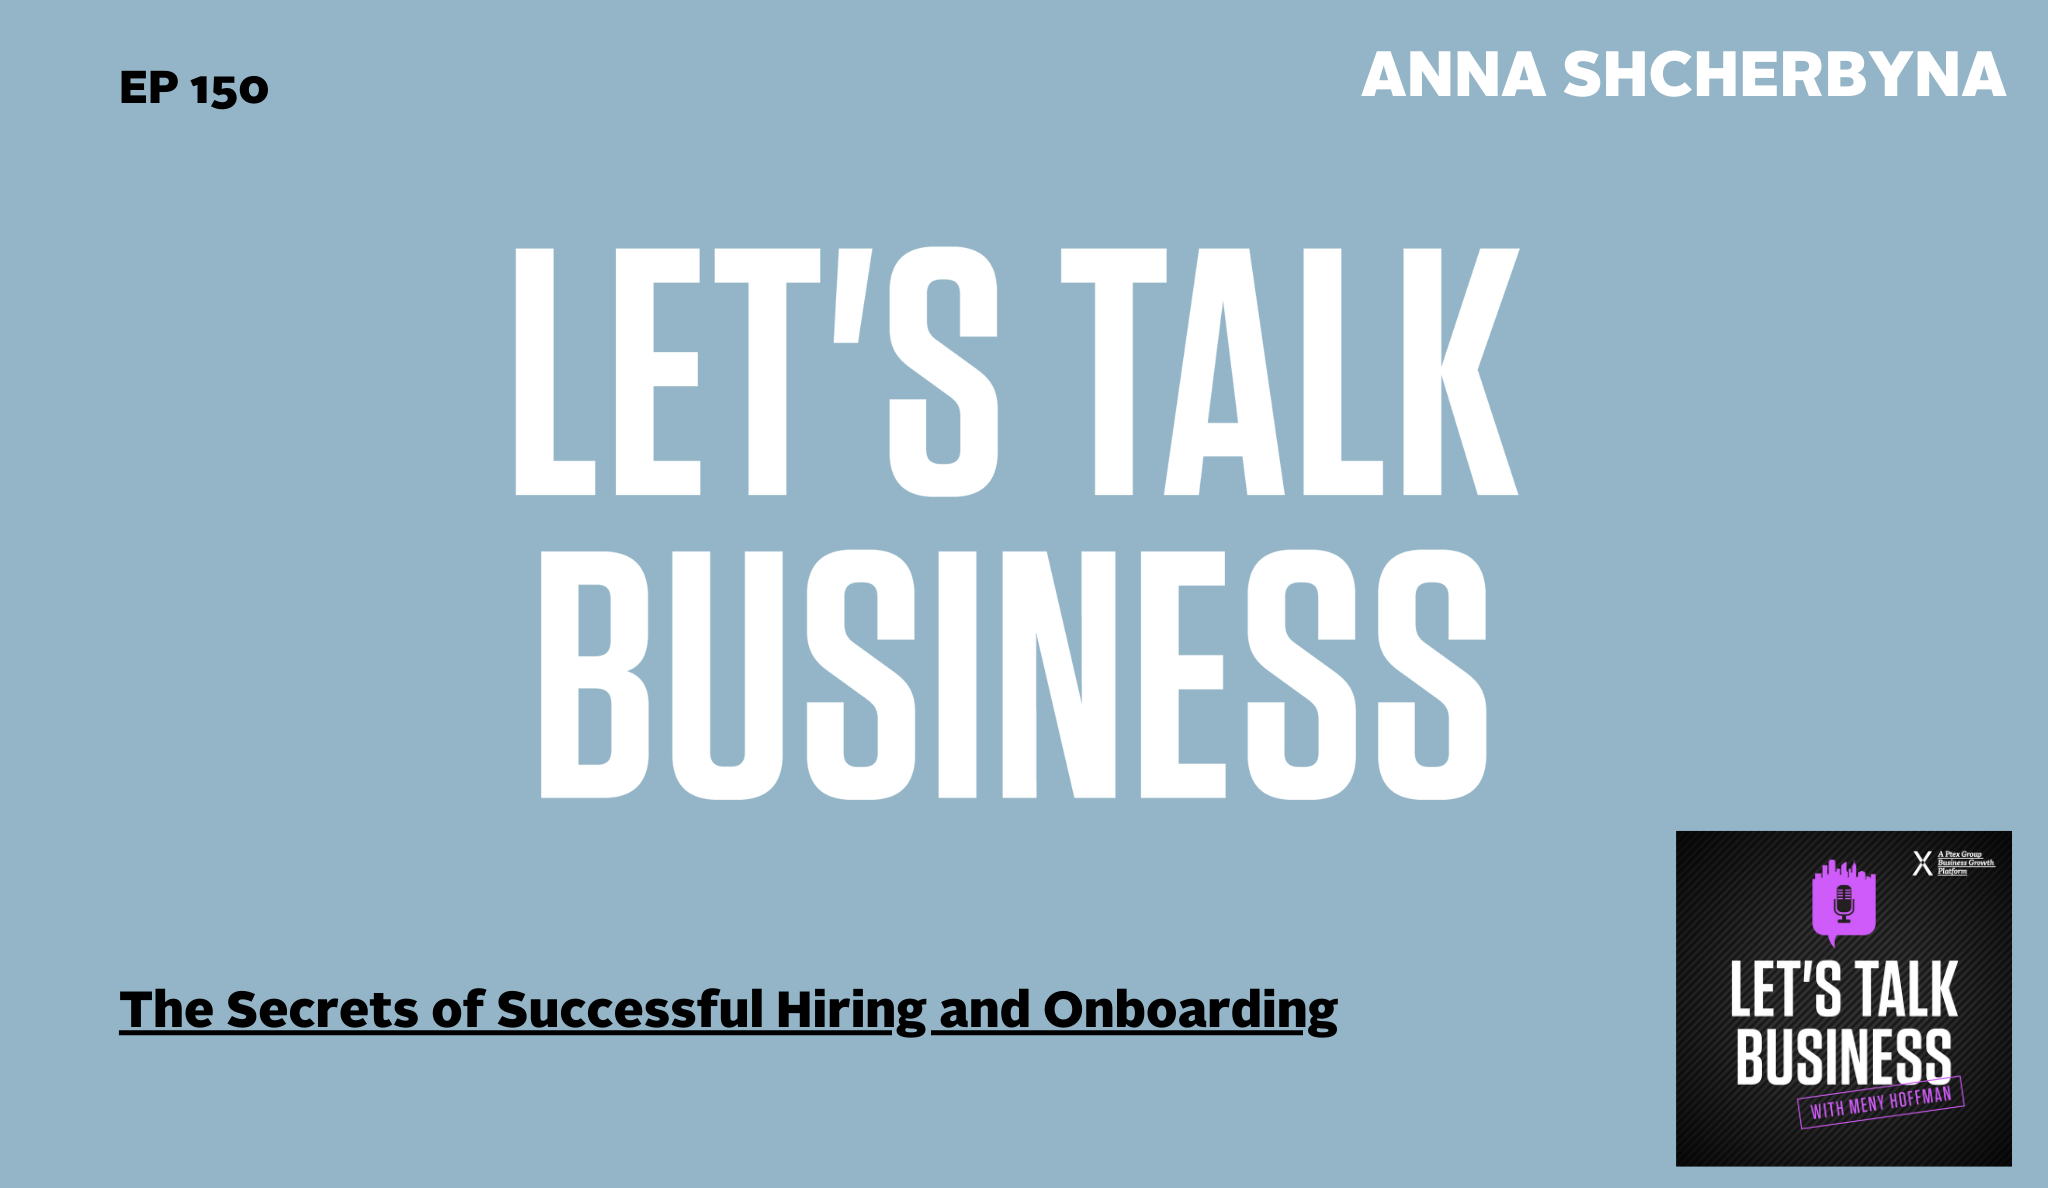 The Secrets of Successful Hiring and Onboarding with Anna Shcherbyna